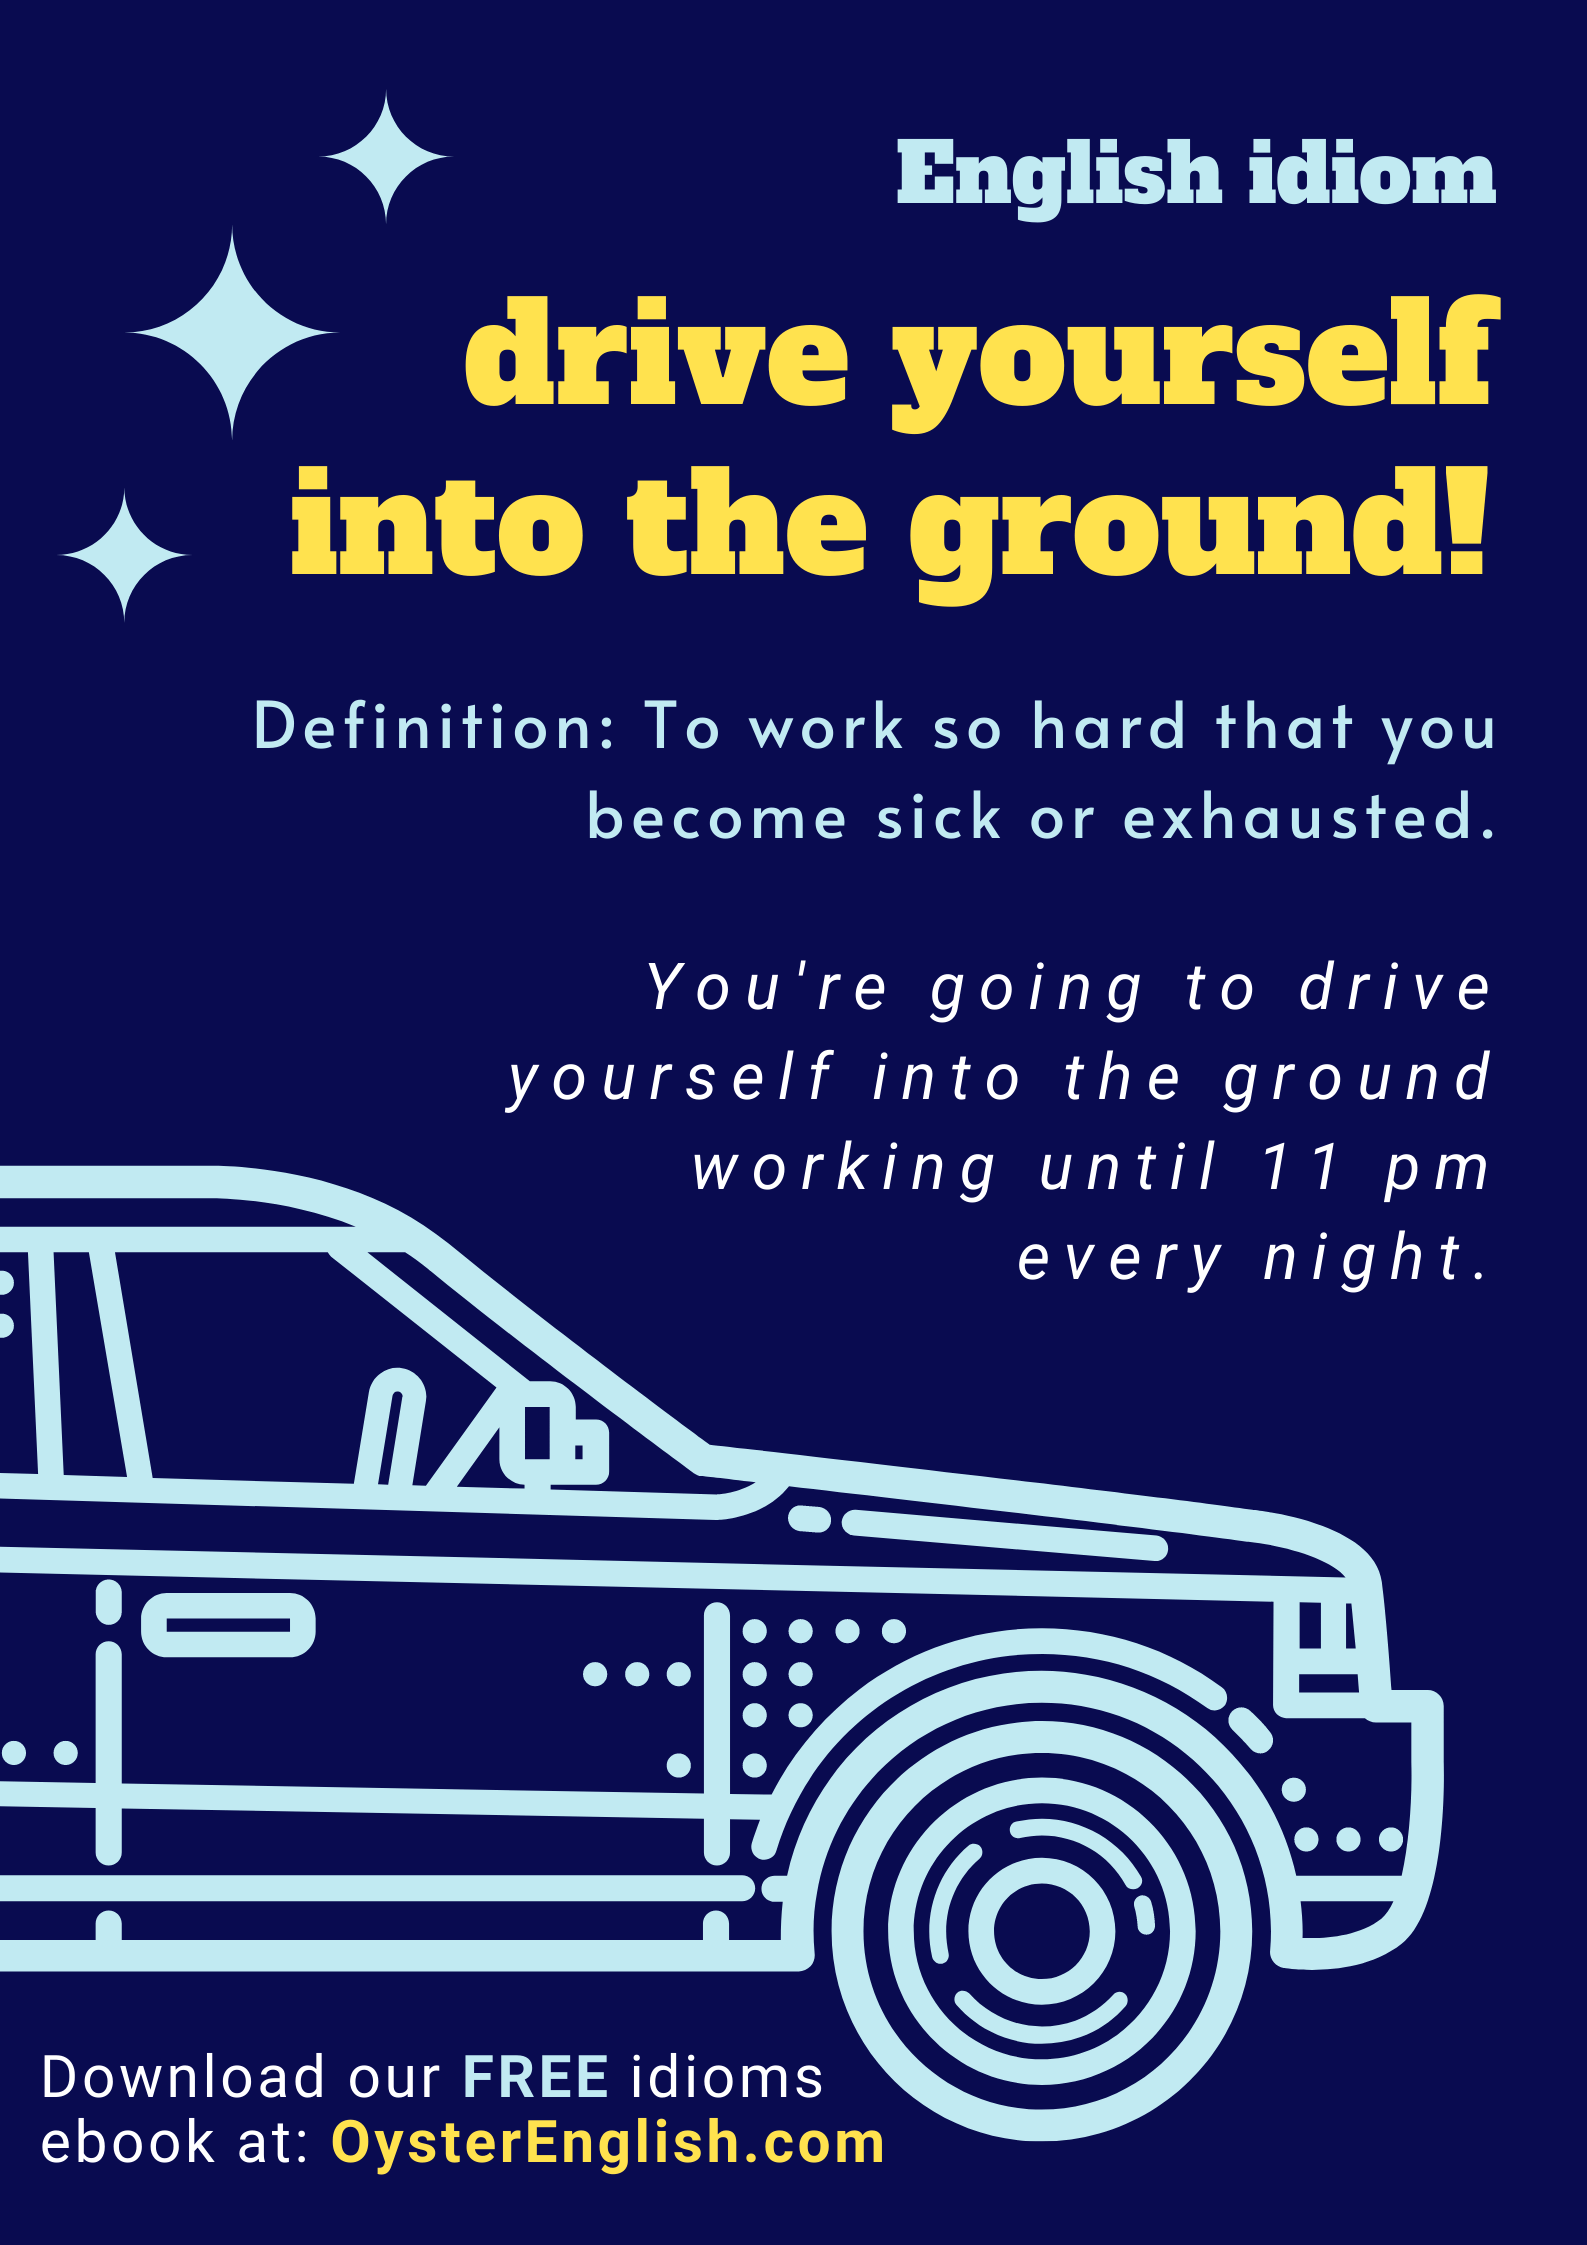 Picture of car and idiom definition + example: You're going to drive yourself into the ground working until 11 pm every night.